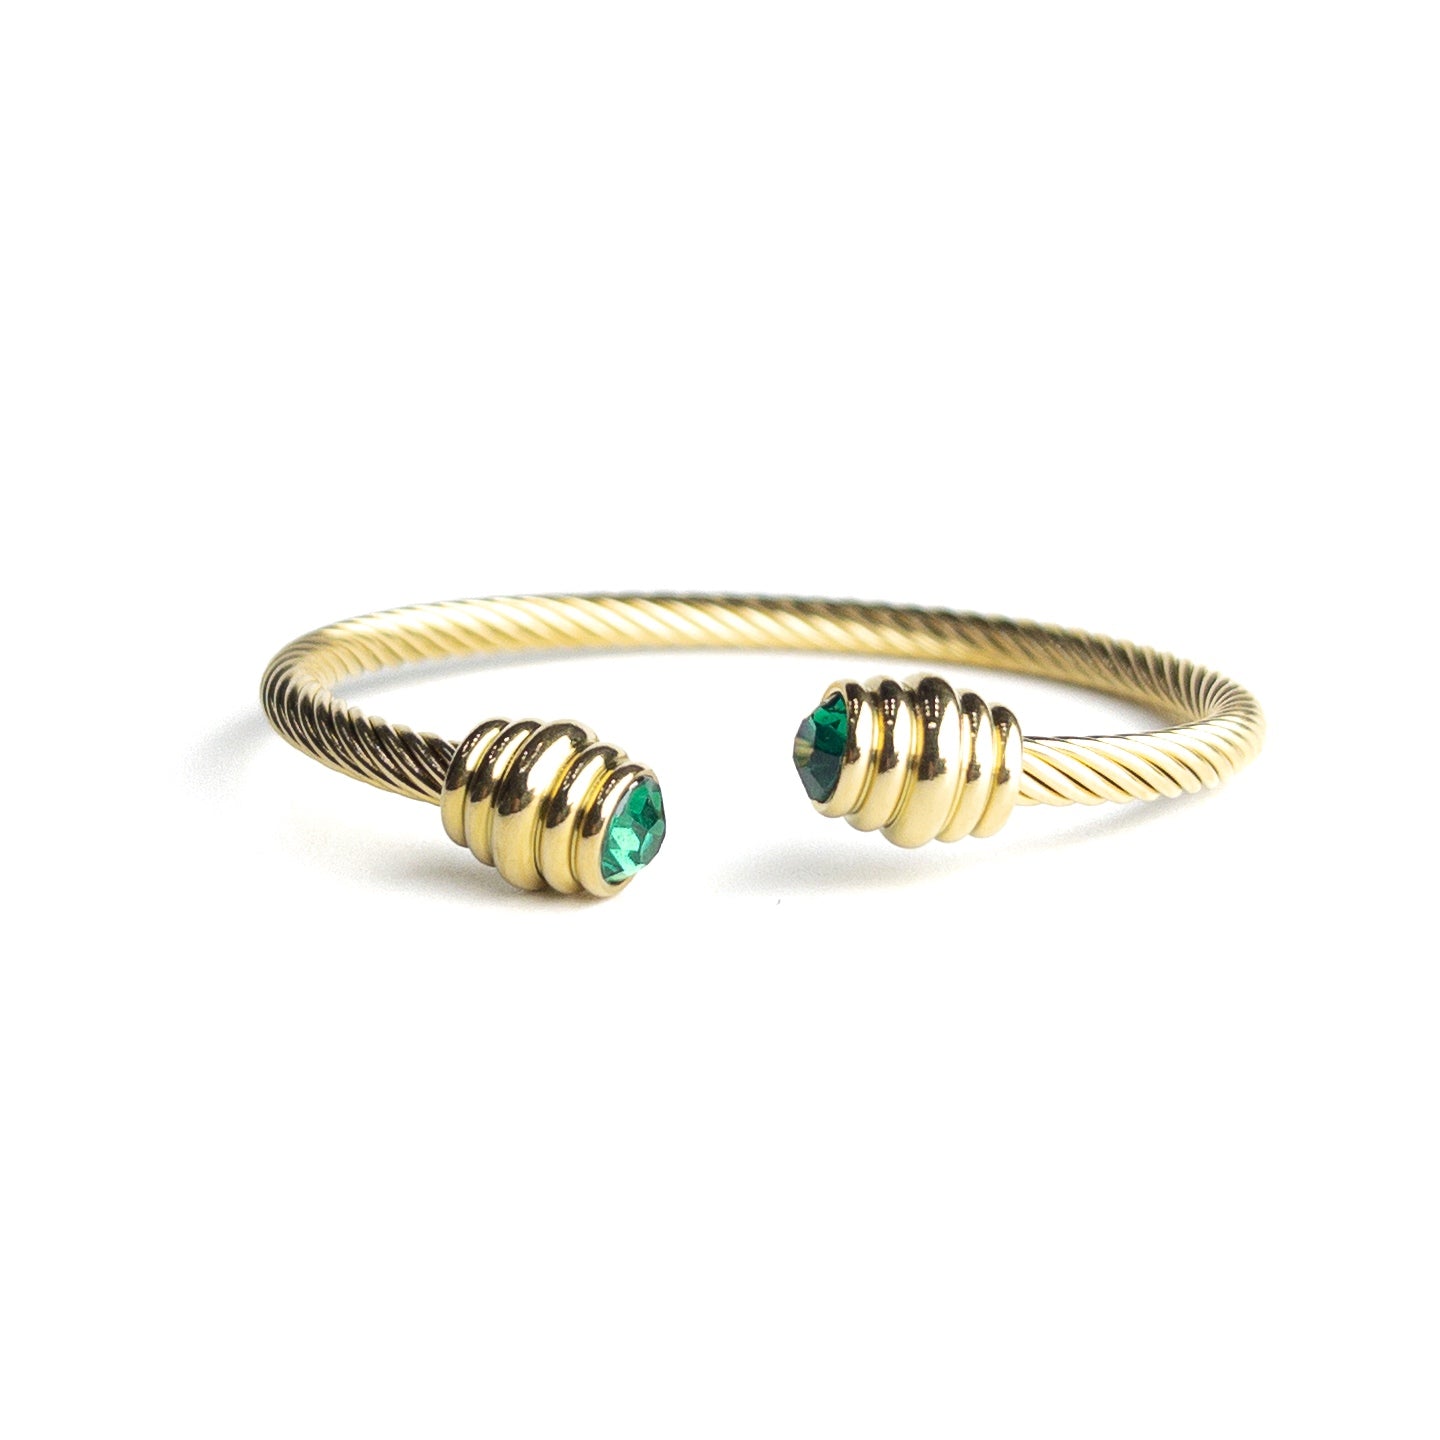 The Green Twisted bangle